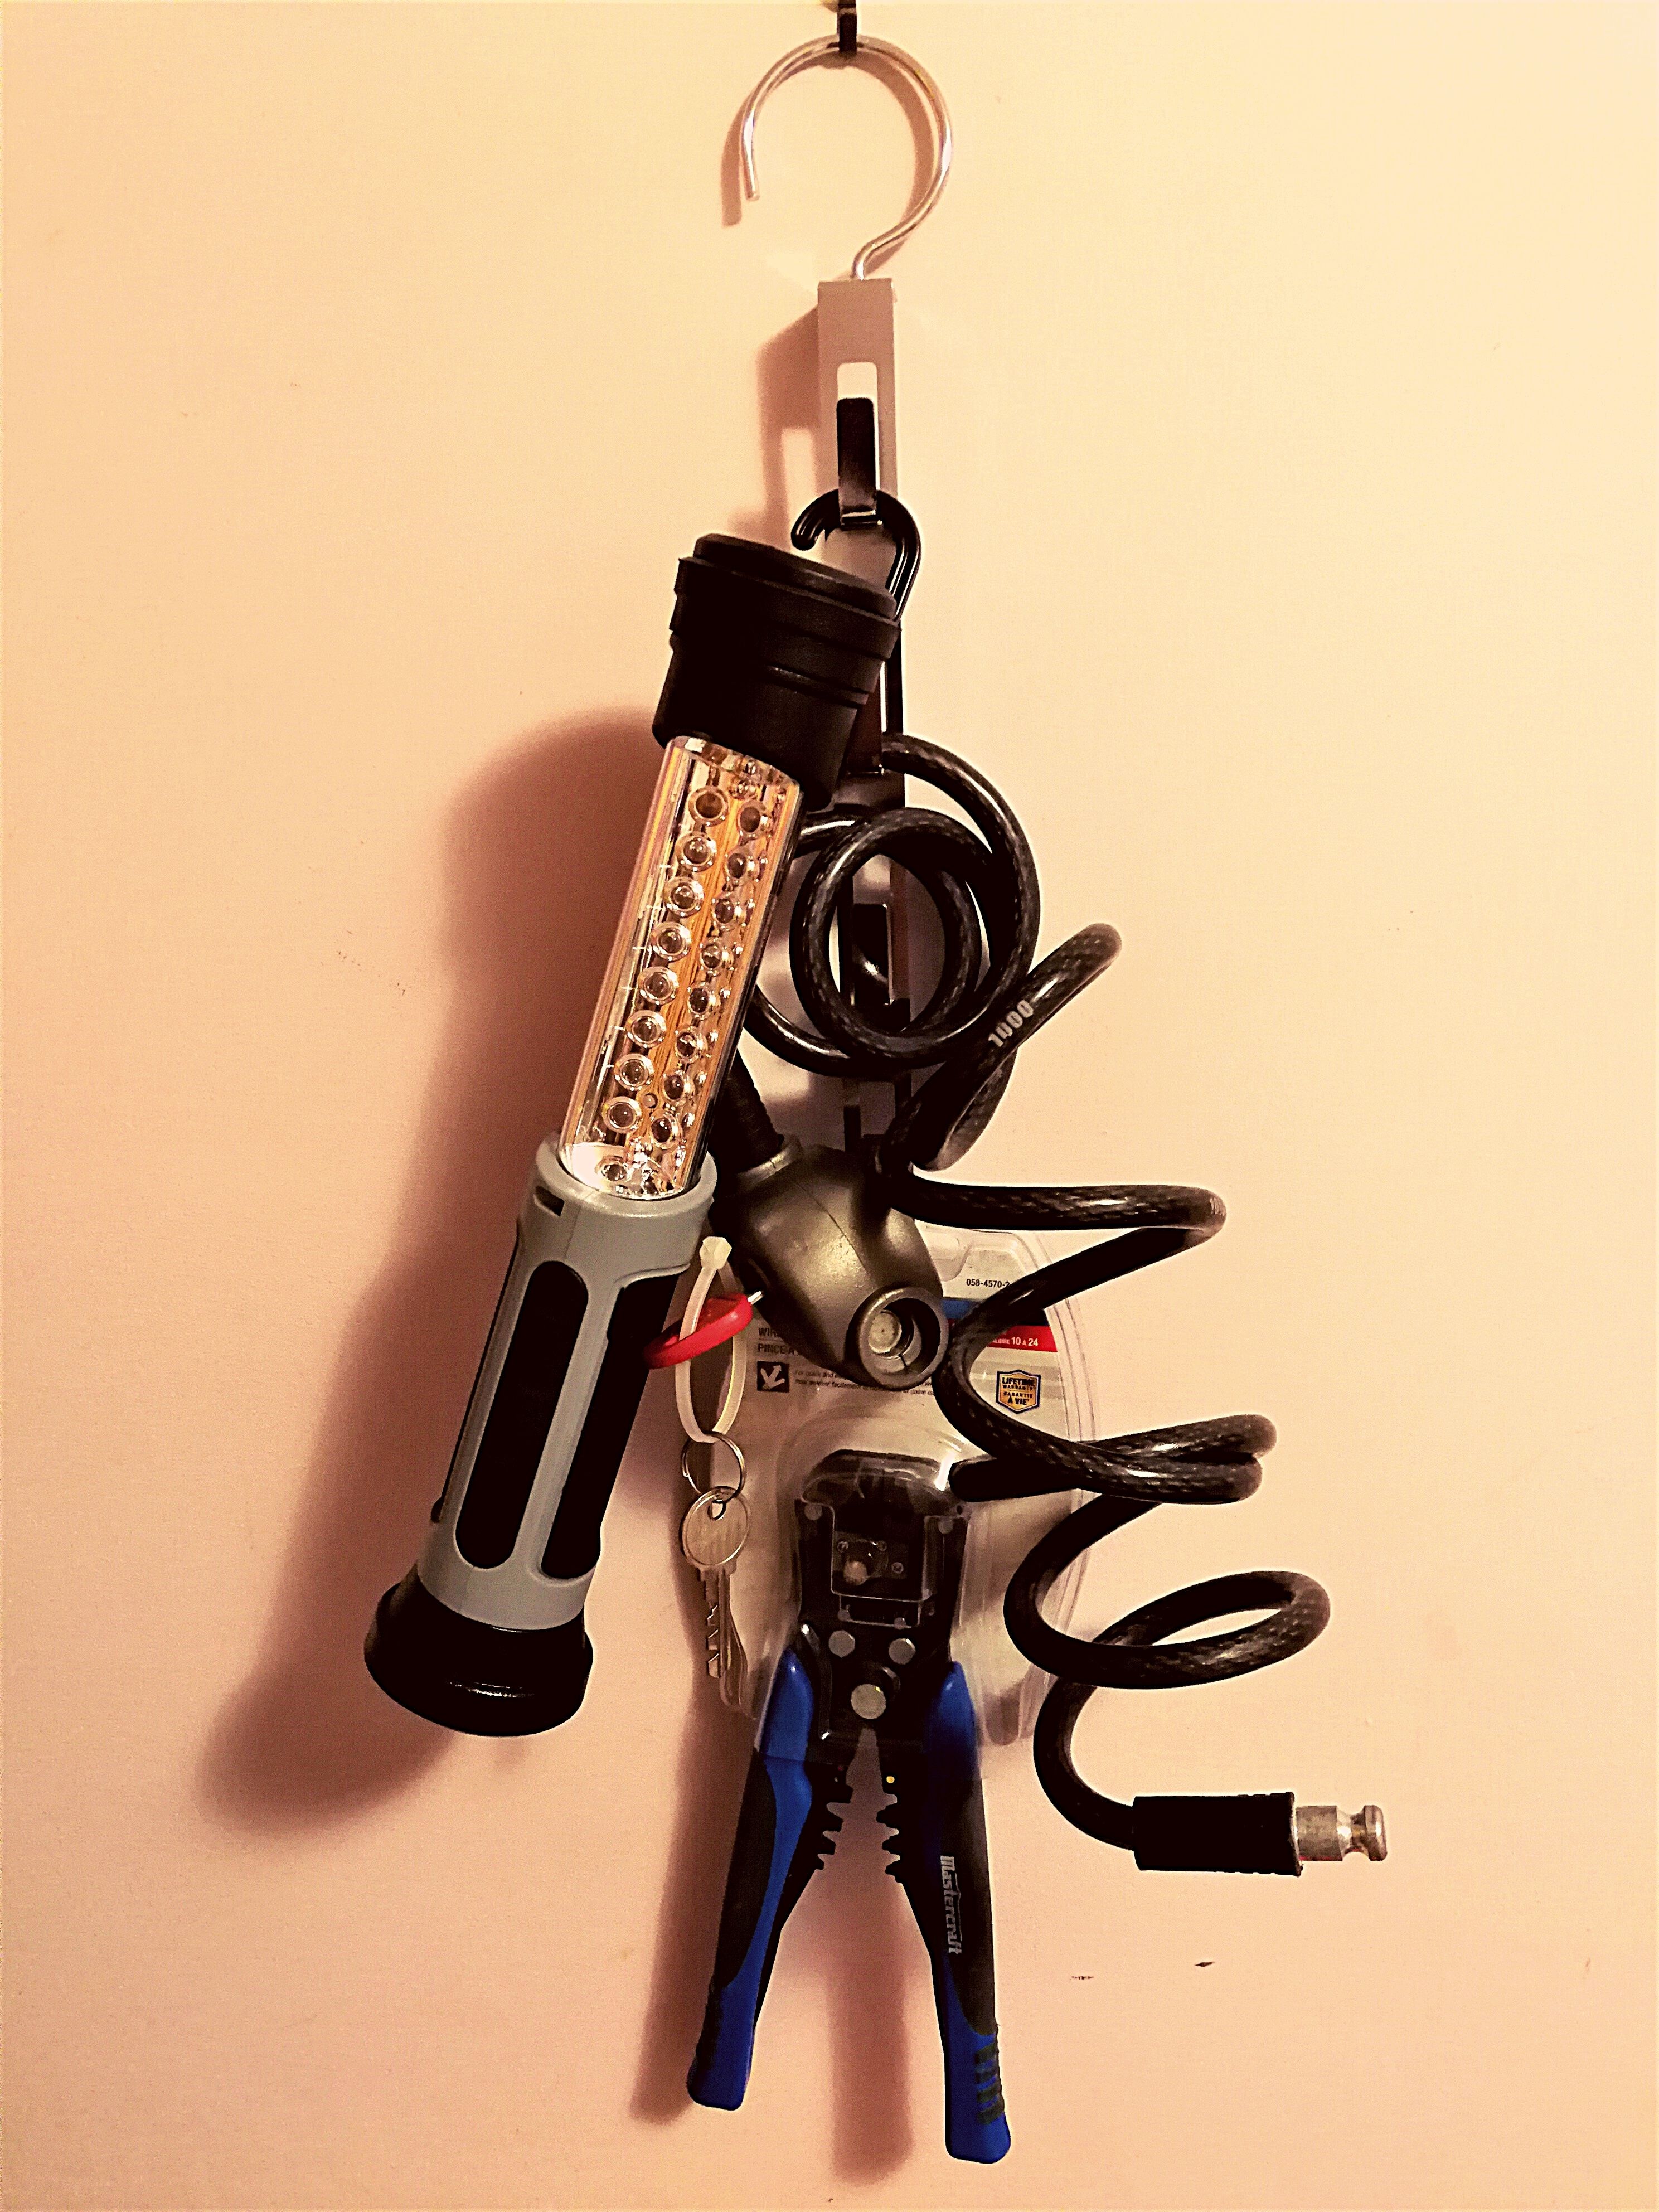 D'klutz multifuntional hanger that hangs different types of tools